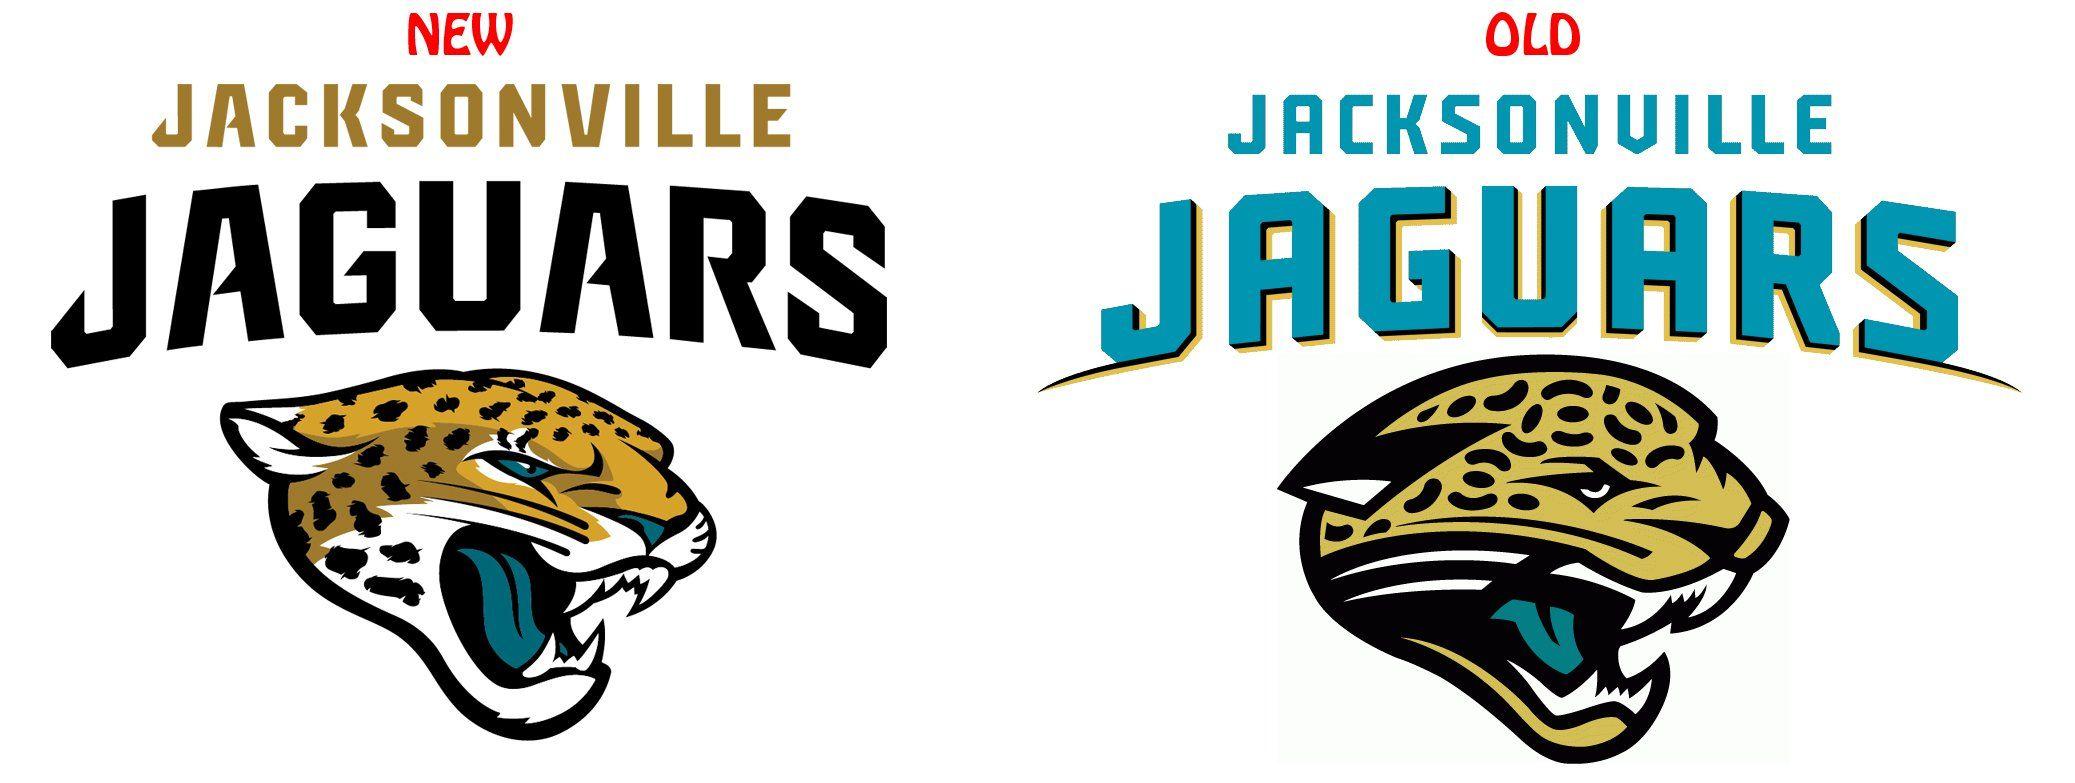 Funny NFL Jaguars Logo - A Funny Thing Happened on the Way to the Jagsâ€™ New Logo: It Didn't